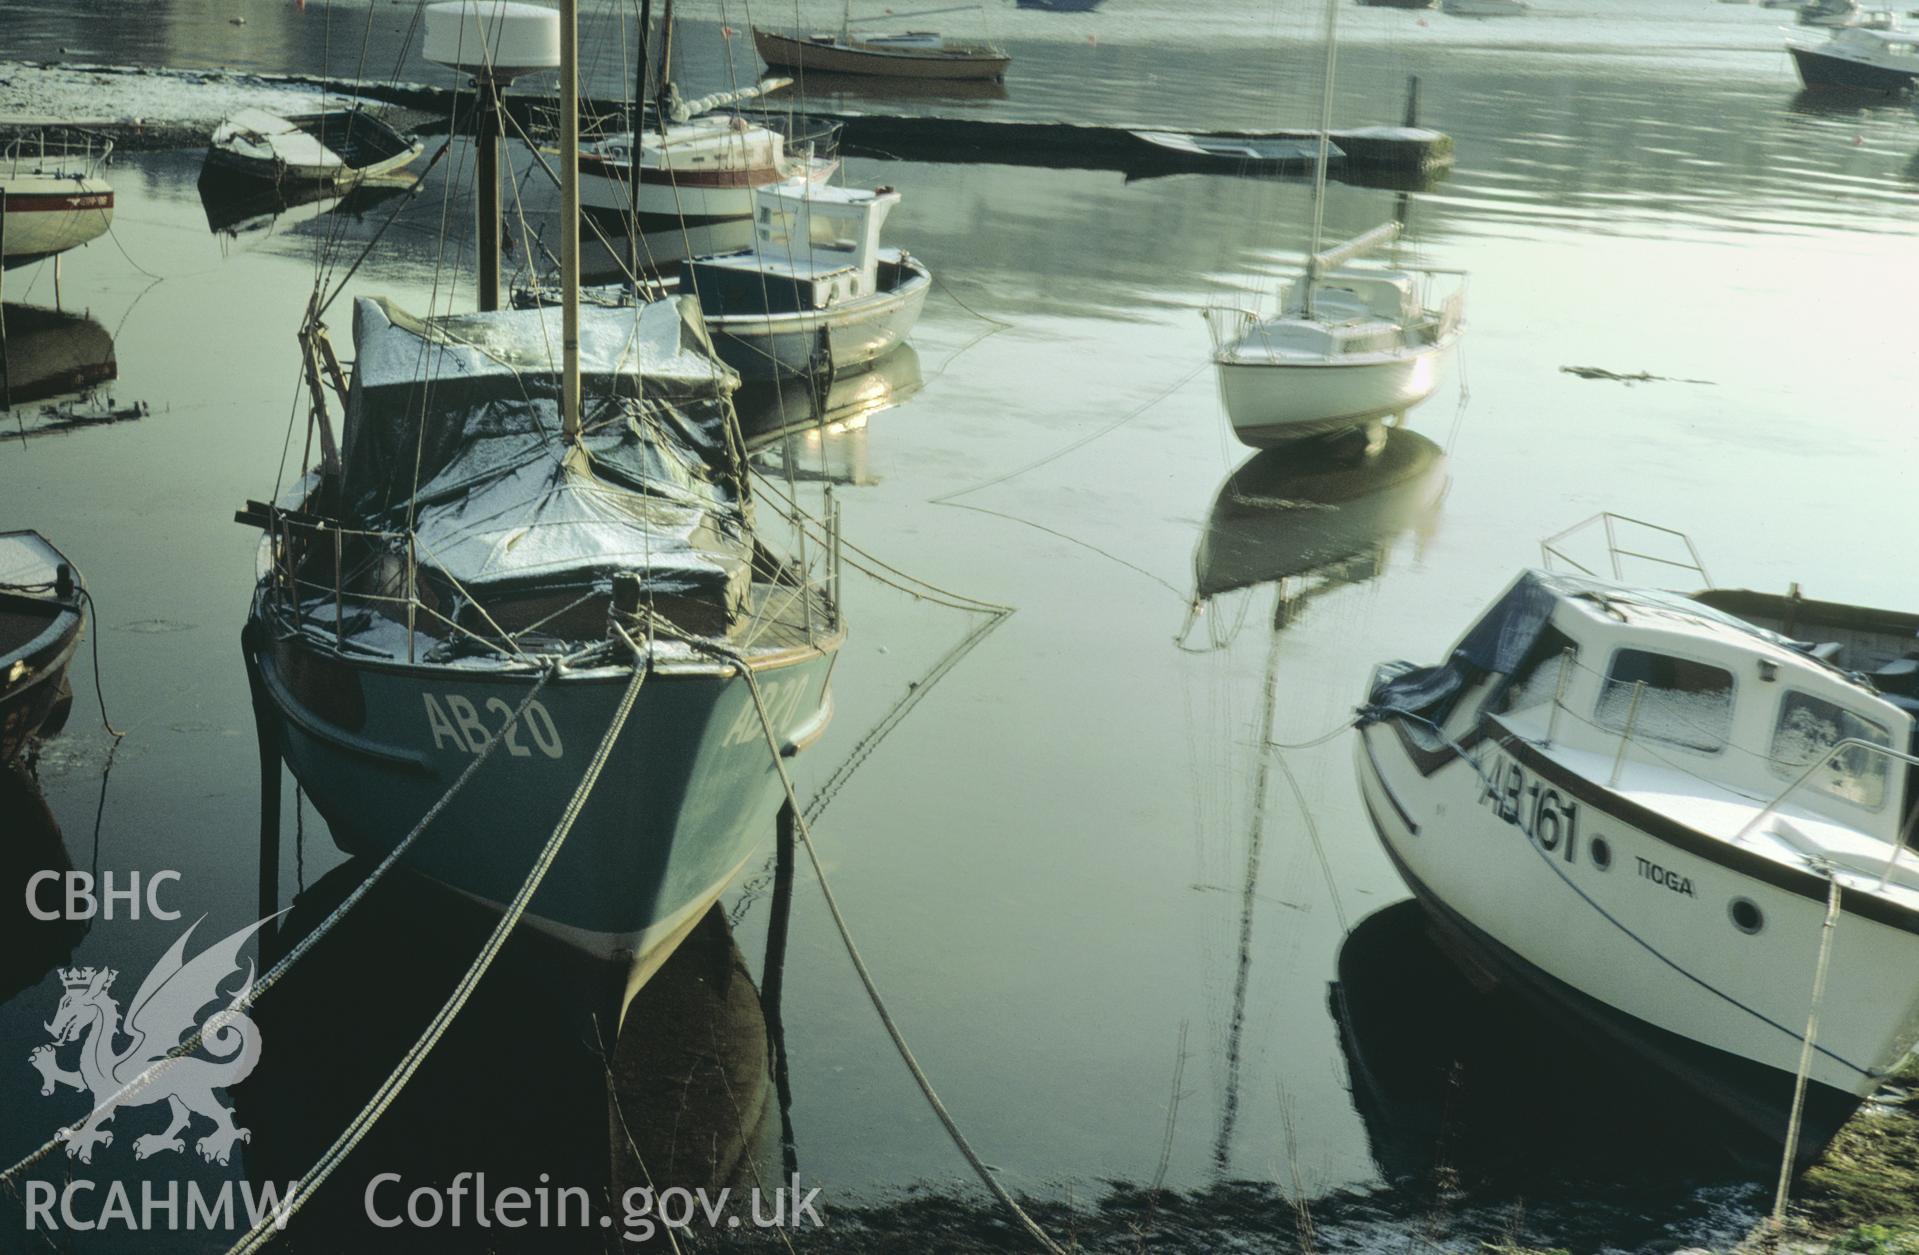 35mm colour slide of Aberystwyth Harbour, Cardiganshire by Dylan Roberts.